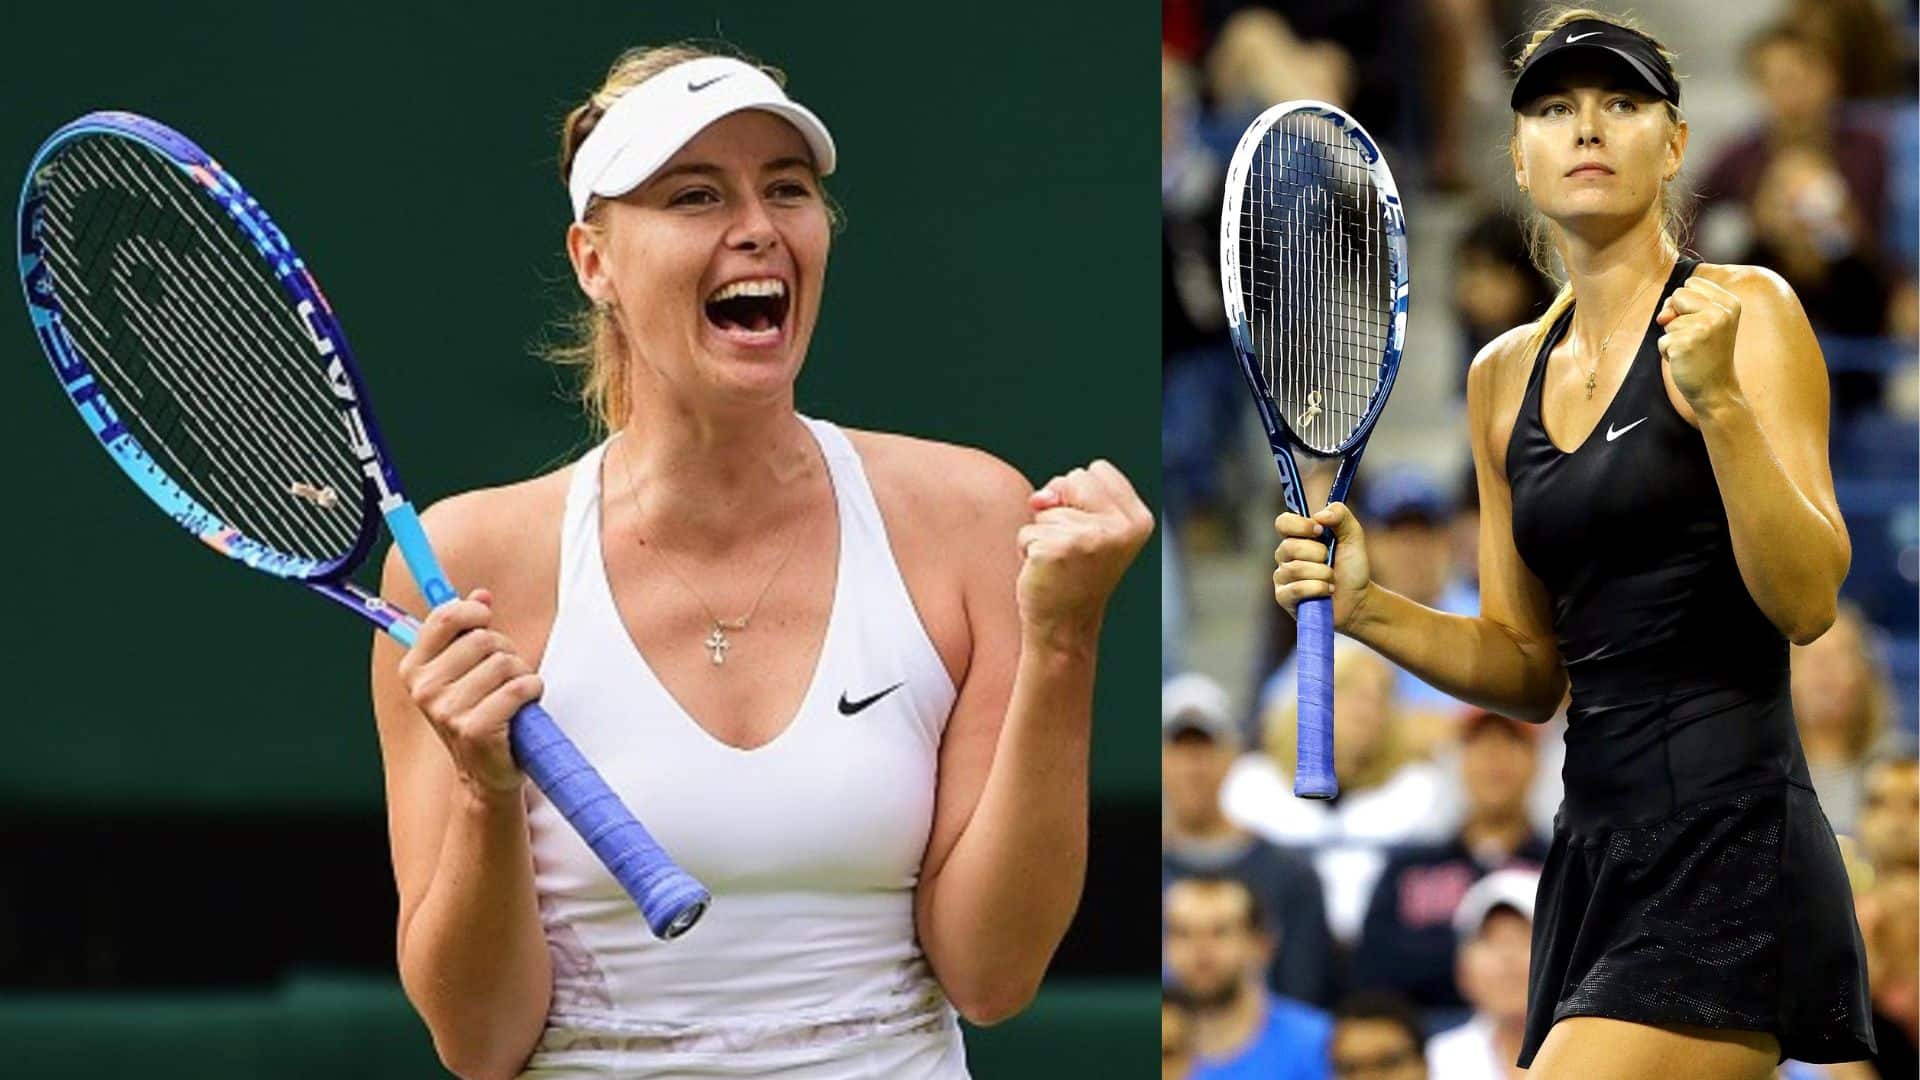 Top Female Tennis Players: 5 Shock You!